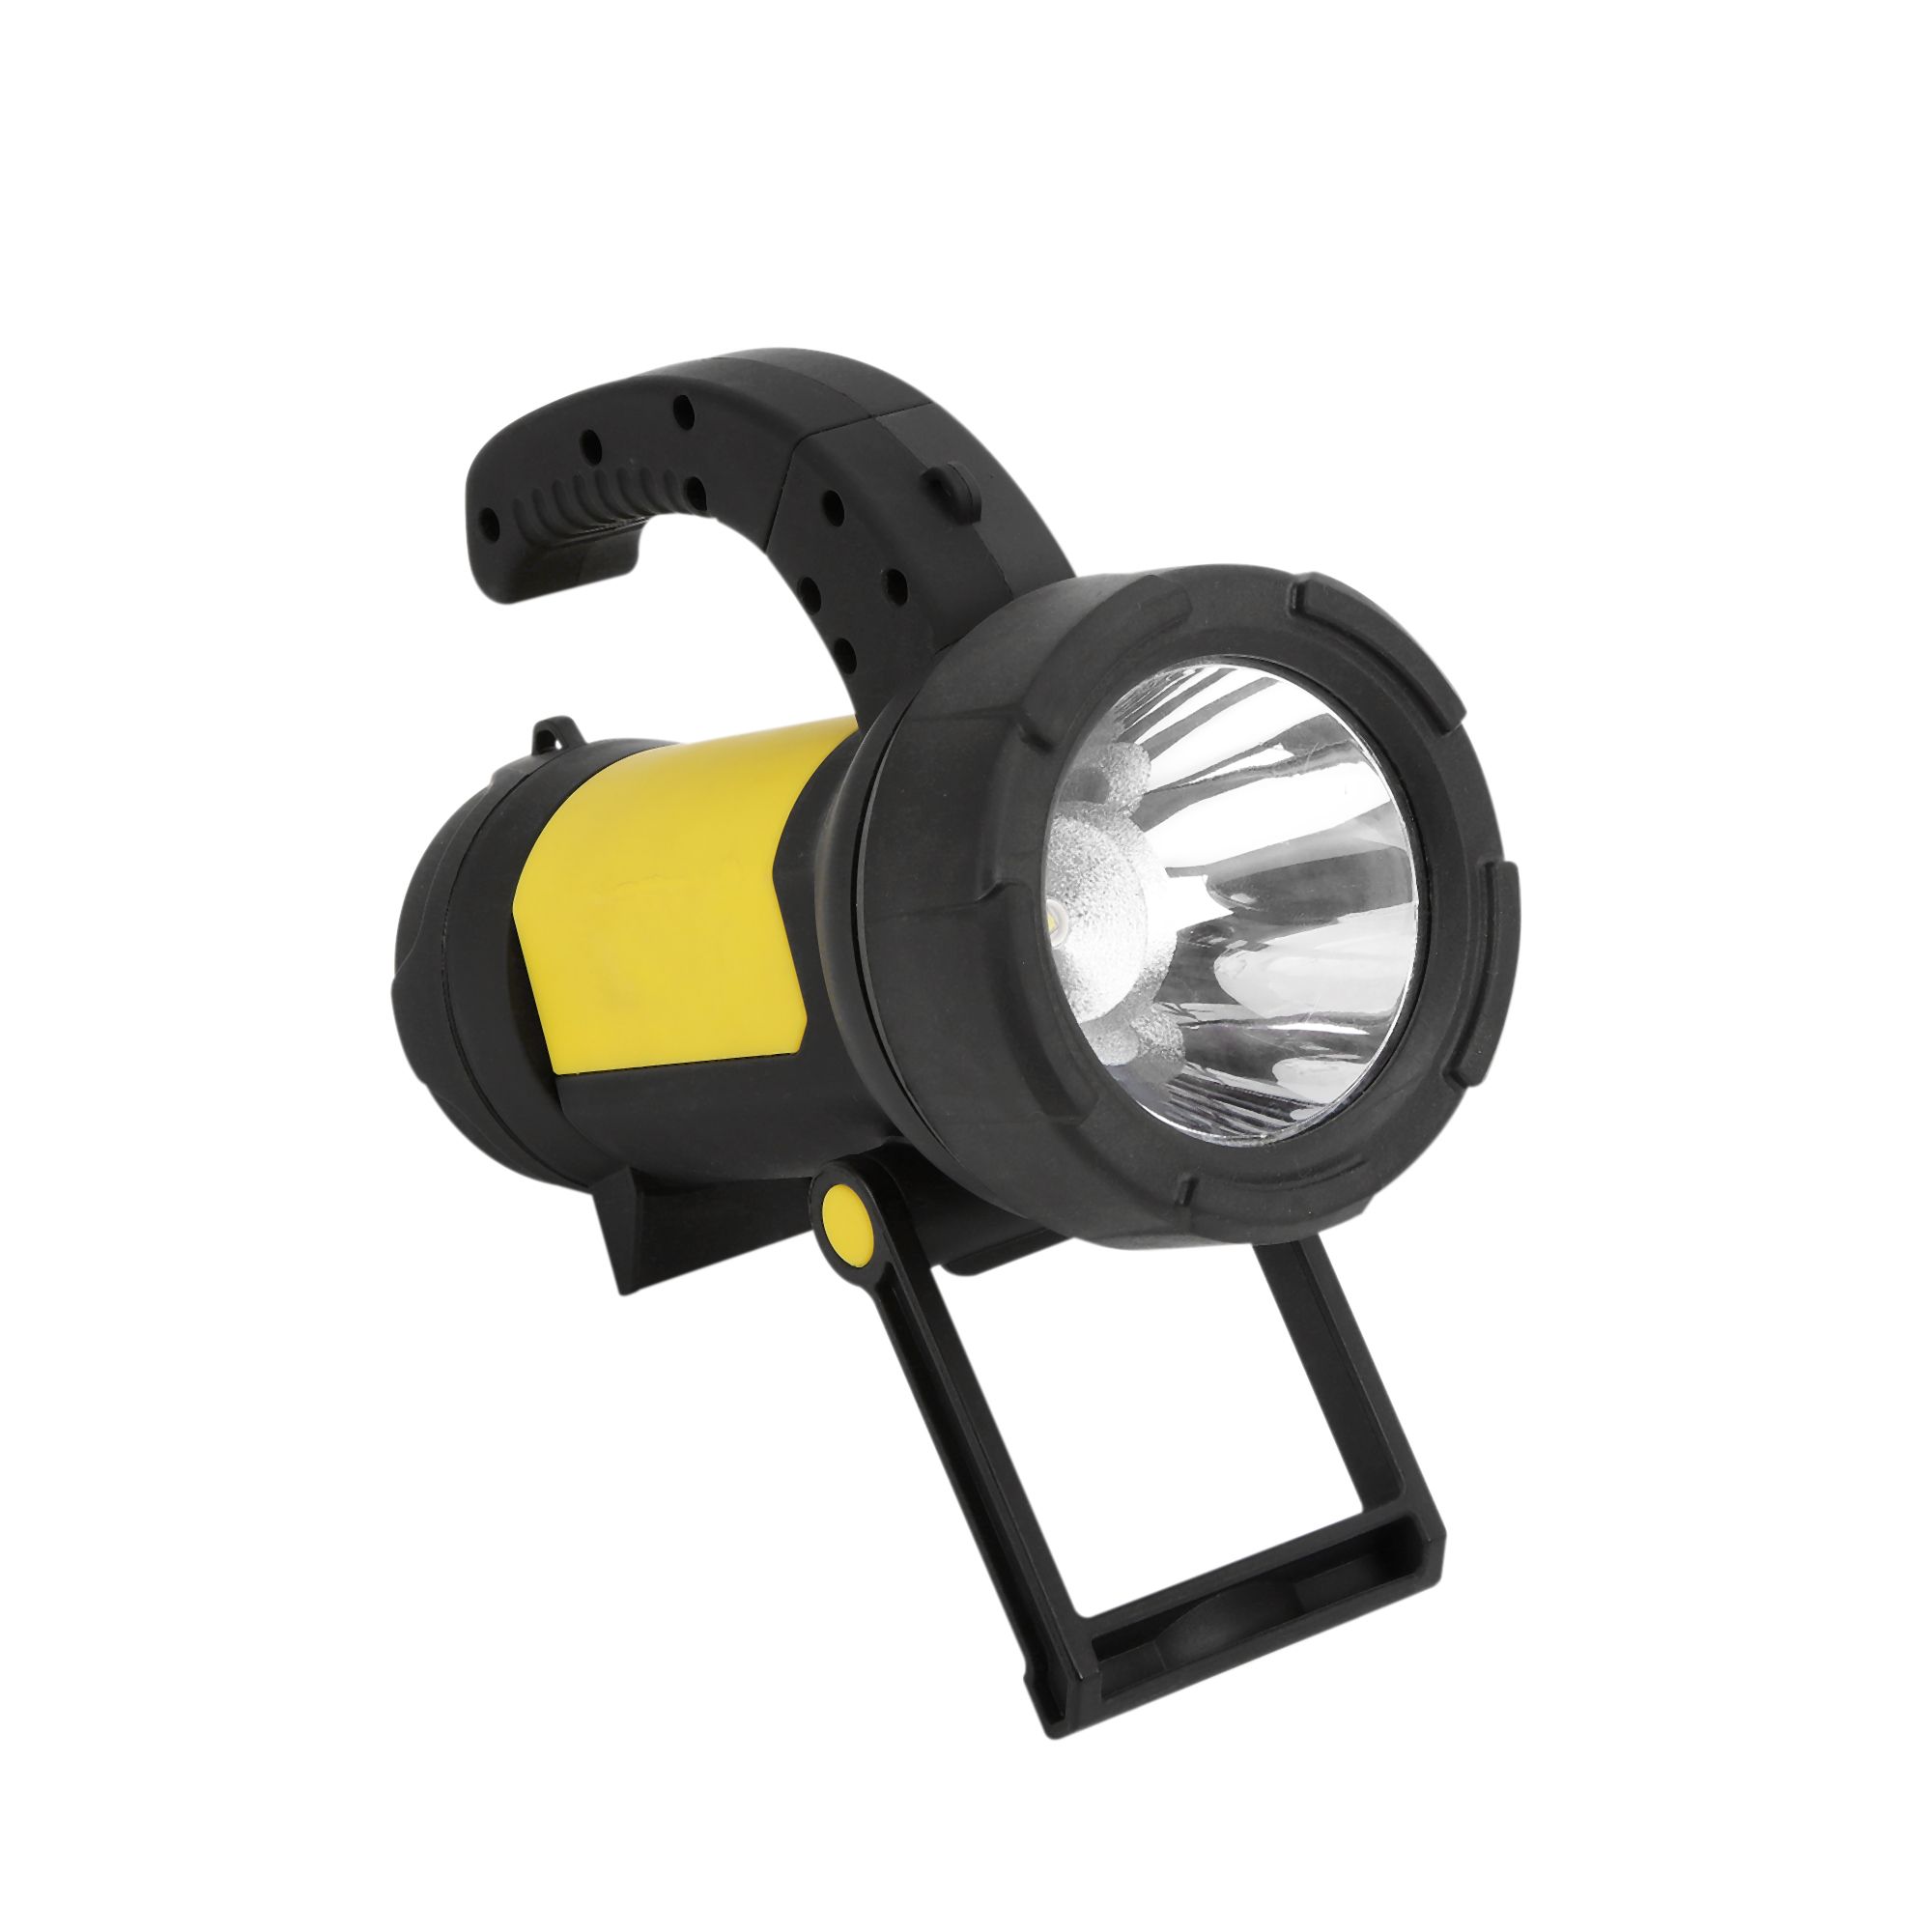 Diall Rechargeable 190lm LED Battery-powered Spotlight torch